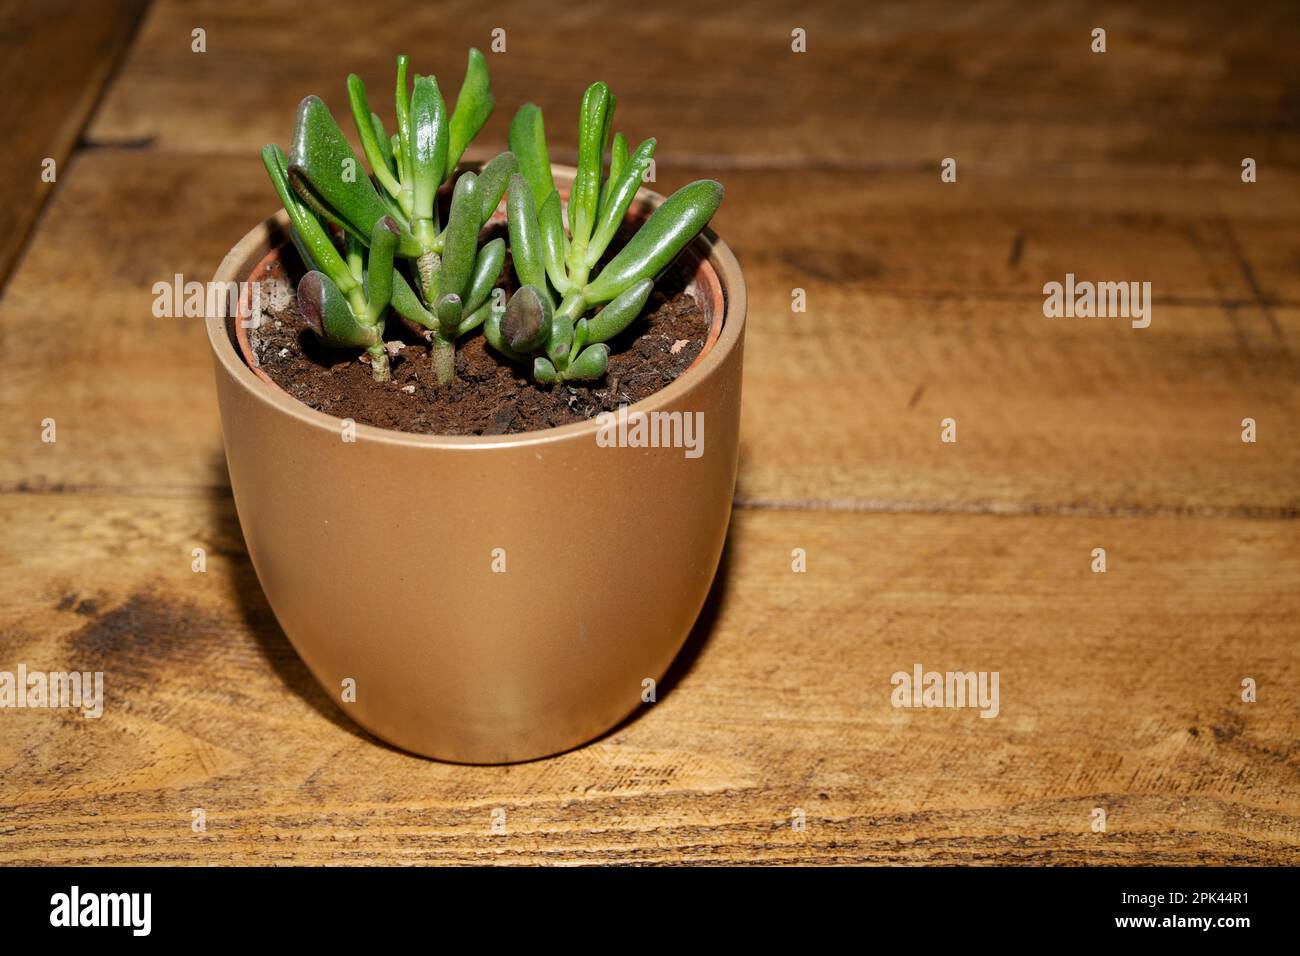 Jade plant, crassula ovata, indoors in a white pot on a wooden table. Stock Photo